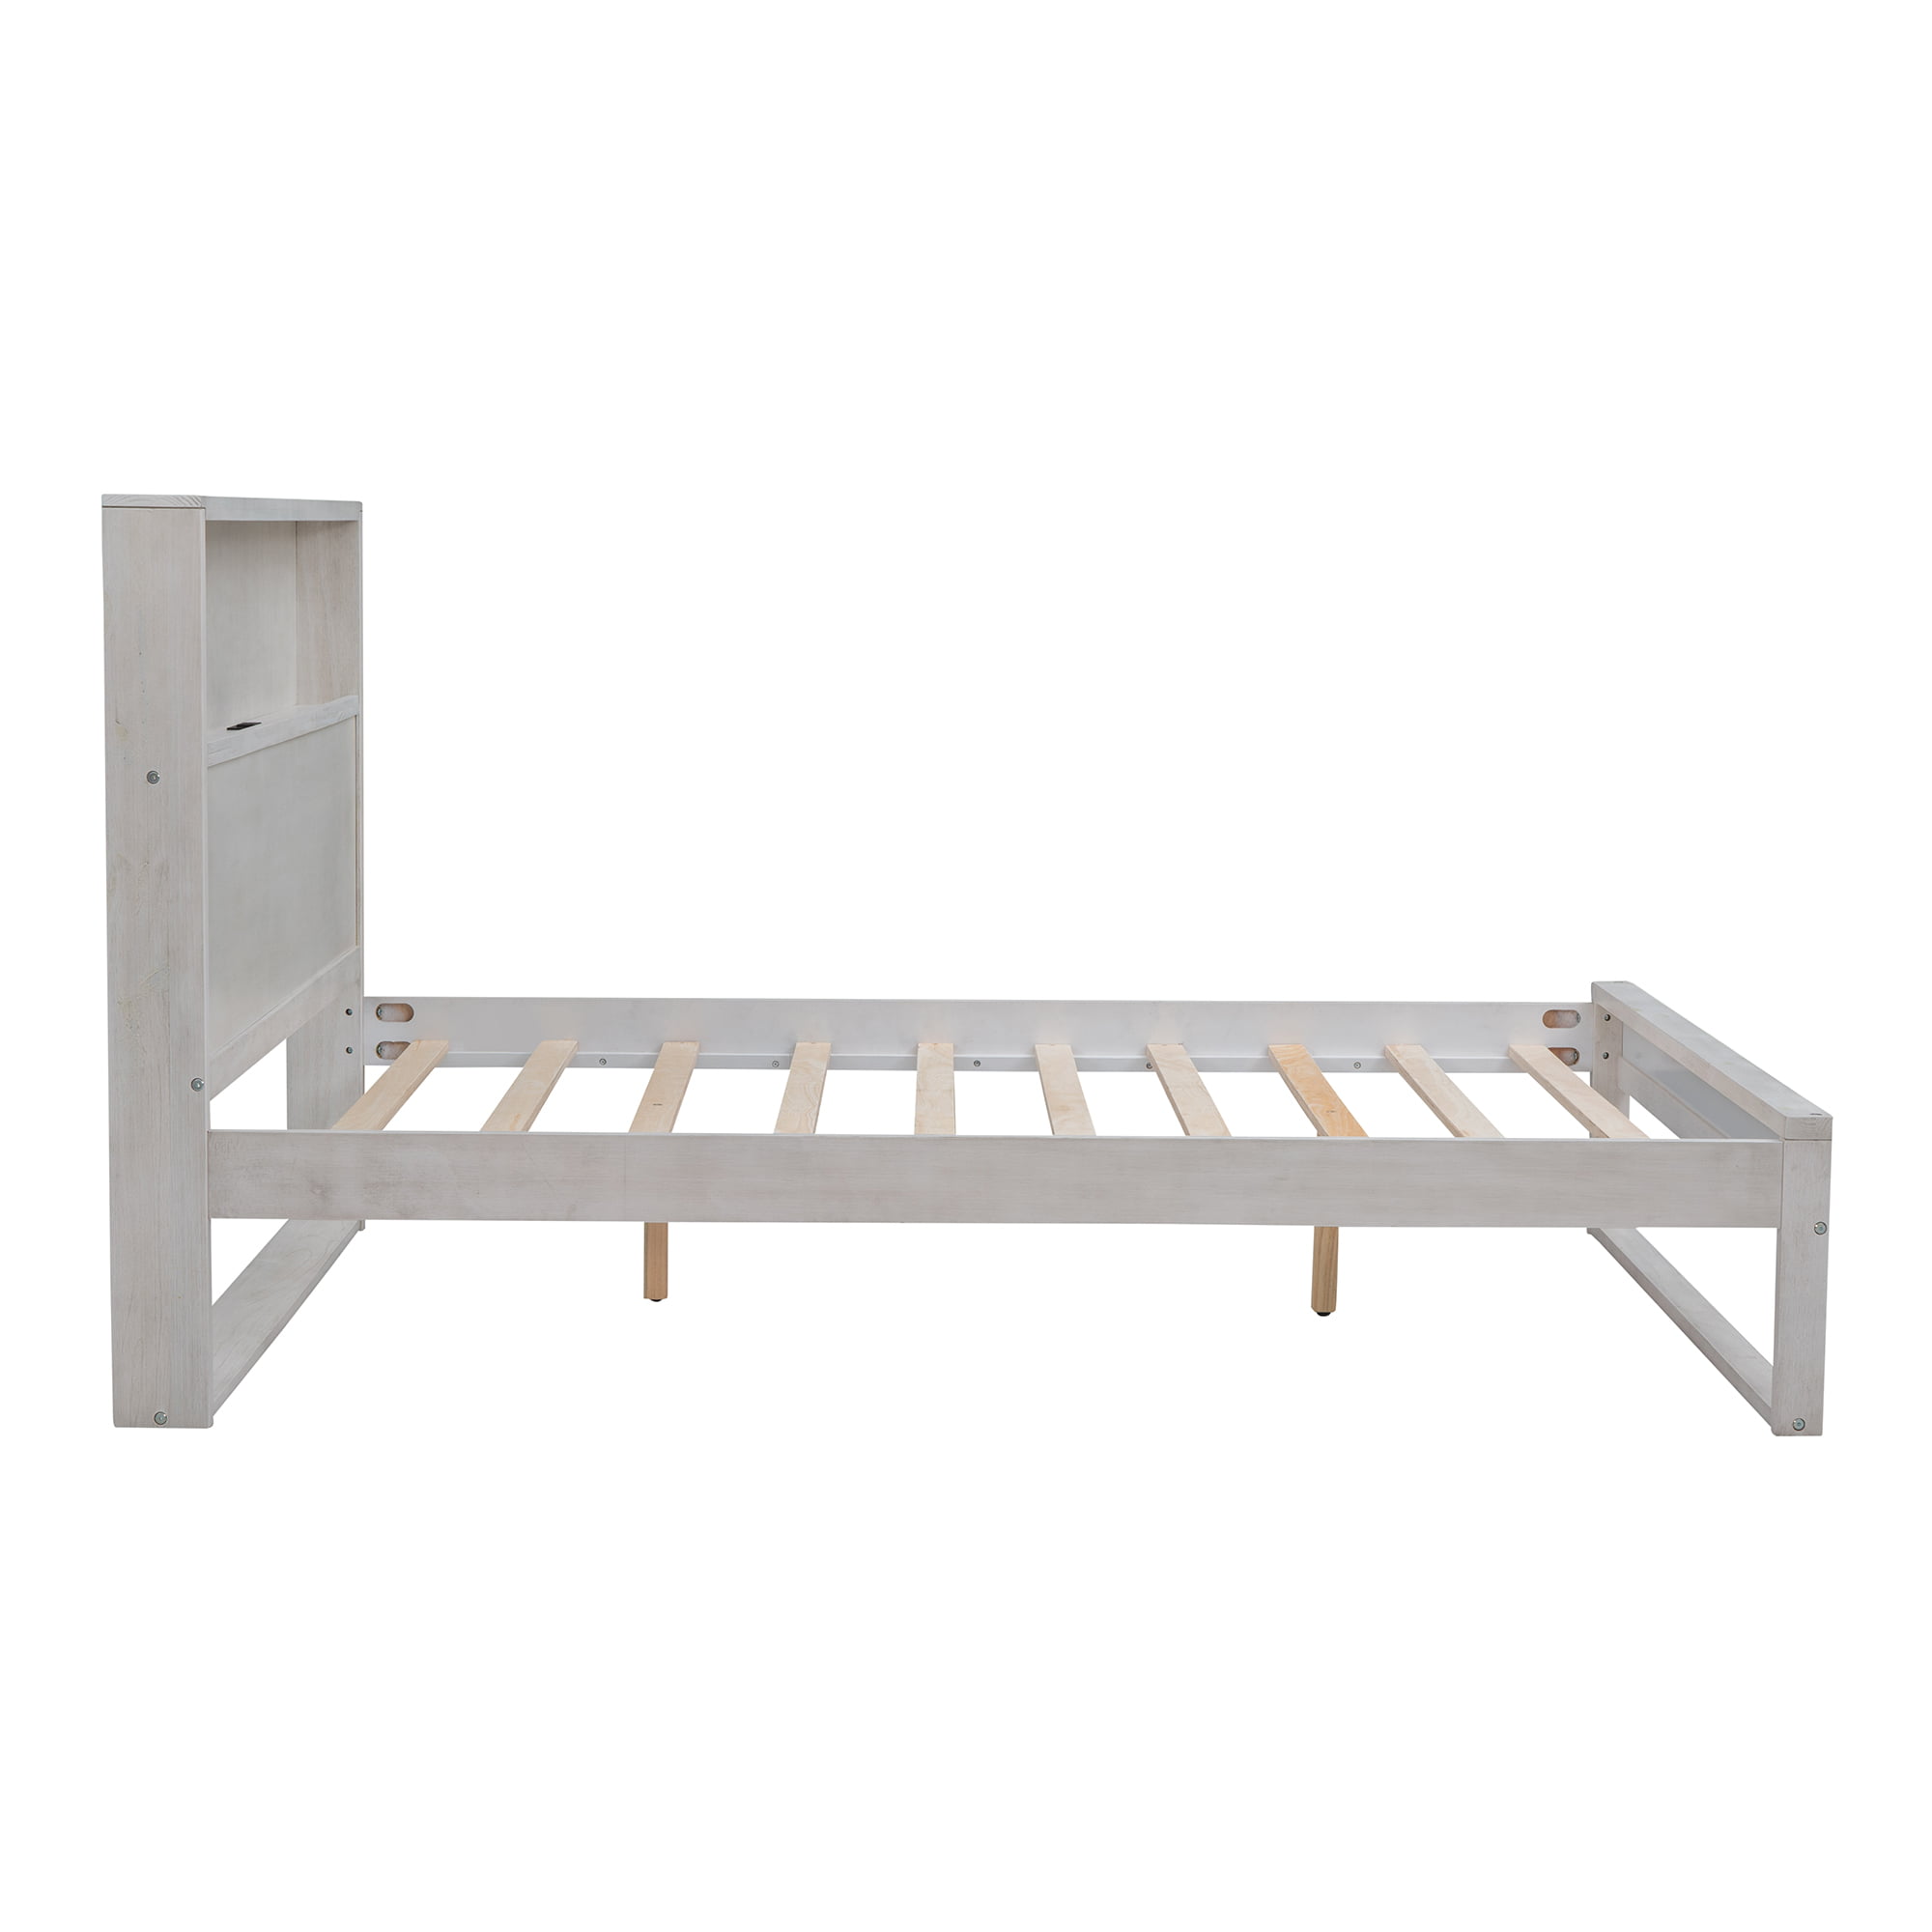 Partina City kader Alice CHURANTY Full Size Platform Bed with Storage Headboard, Wooden Bed Frame  with USB Charging Ports & Socket on Headboard for Bedroom Furniture,  Antique White - Walmart.com